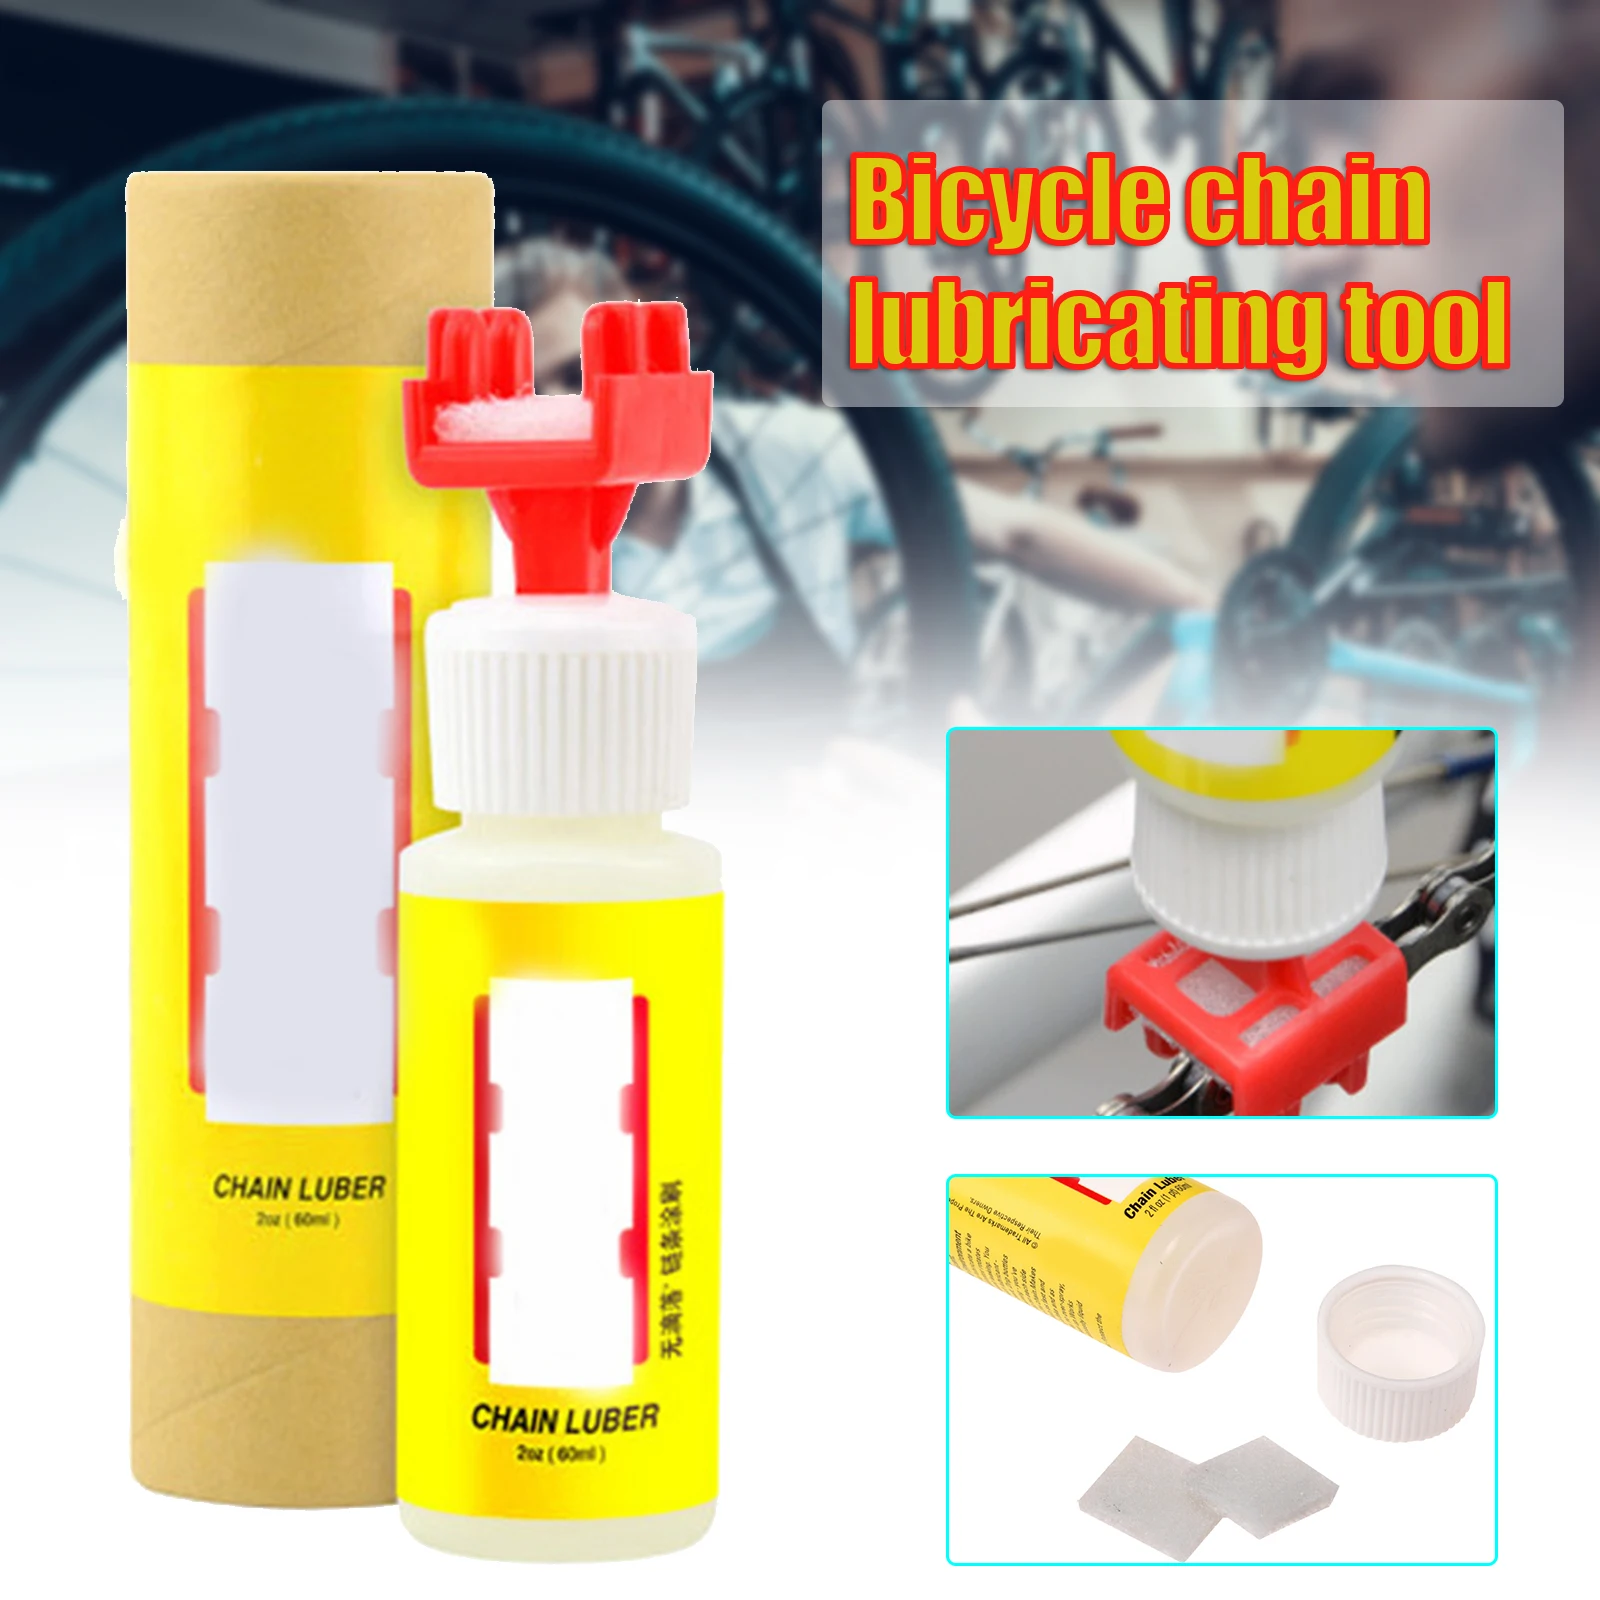 

Newly No-Drip Bike Chain Luber Motor Chain Gear Oiler Lubricator Lubricant Lube Cleaner Cycle Care Tool for Home 60ml